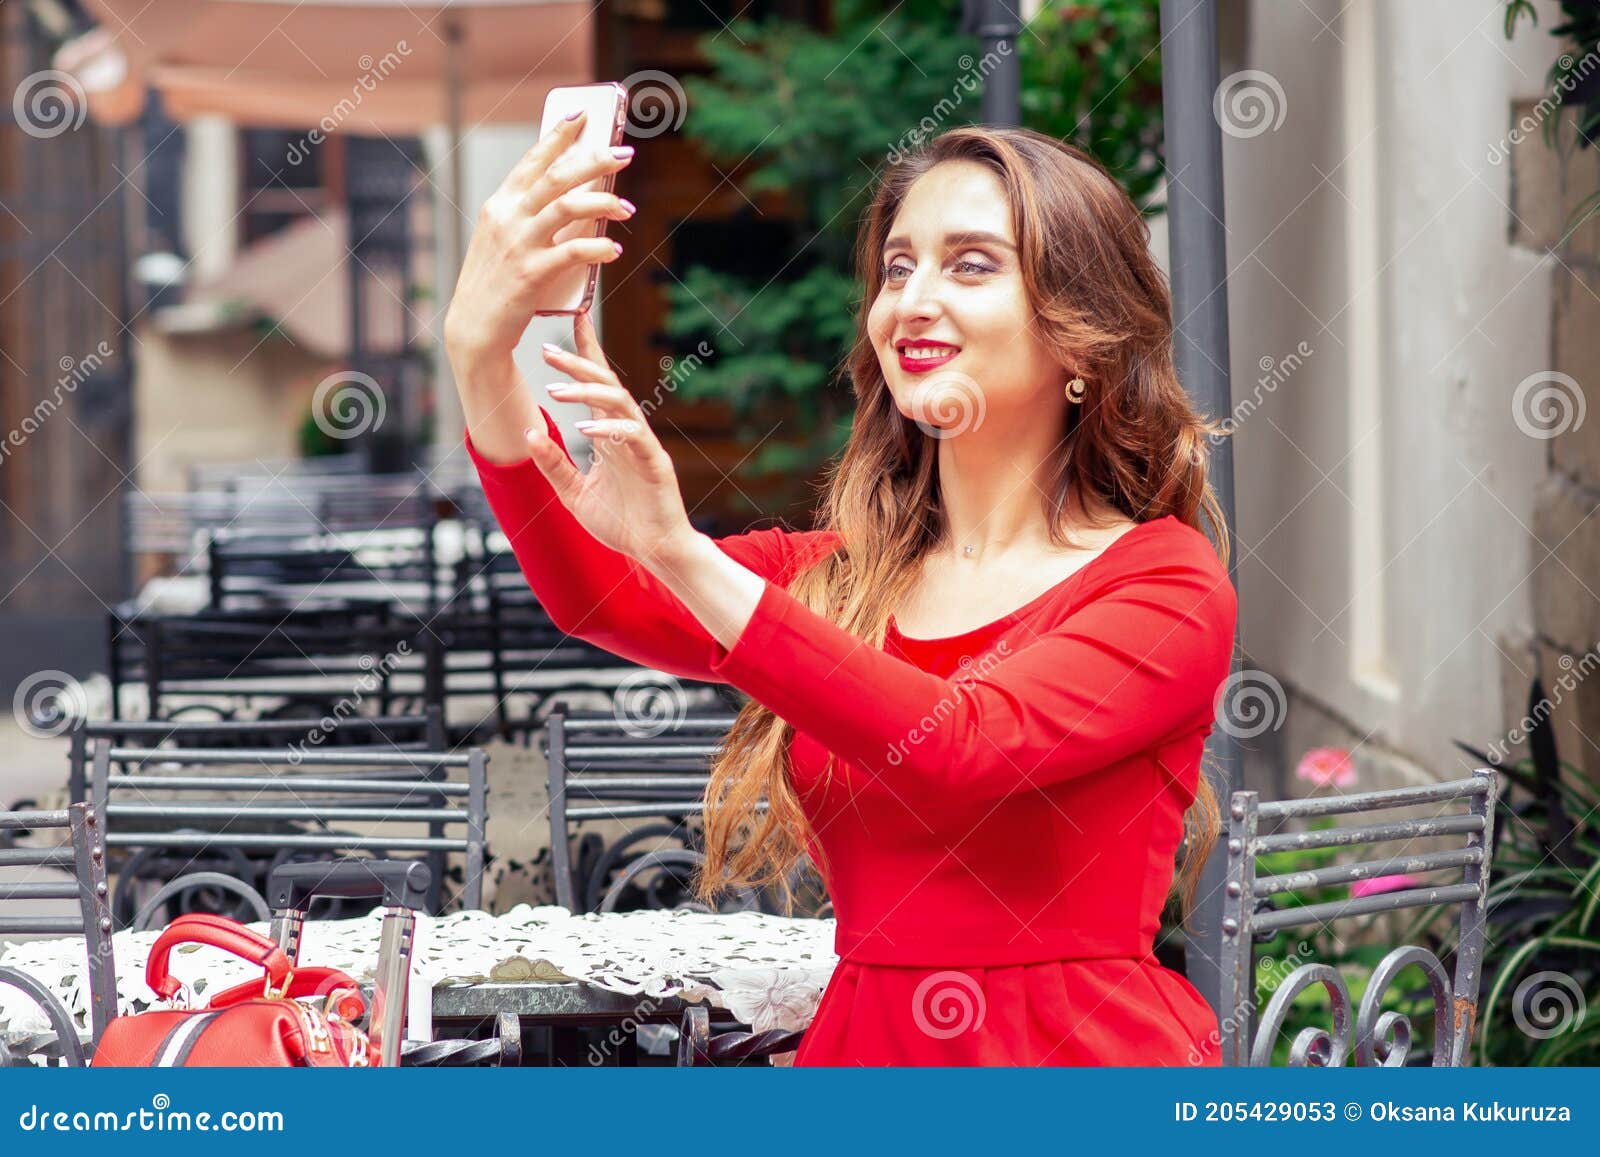 Girl Takes Selfie On Smartphone Stock Image Image Of Outdoor Mobile 205429053 